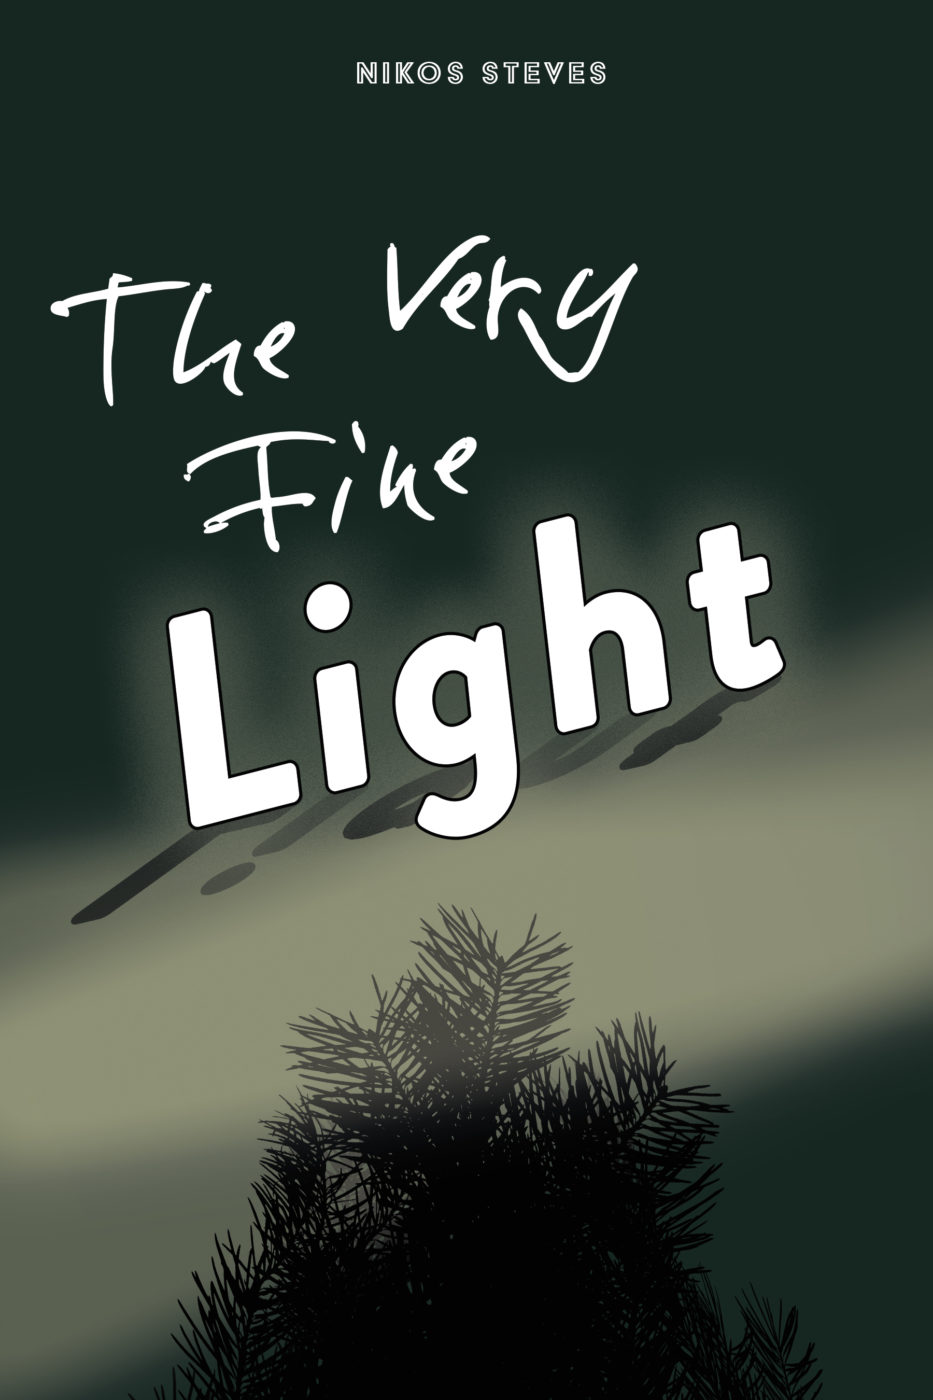 Cover Art for my book "The Very Fine Light"